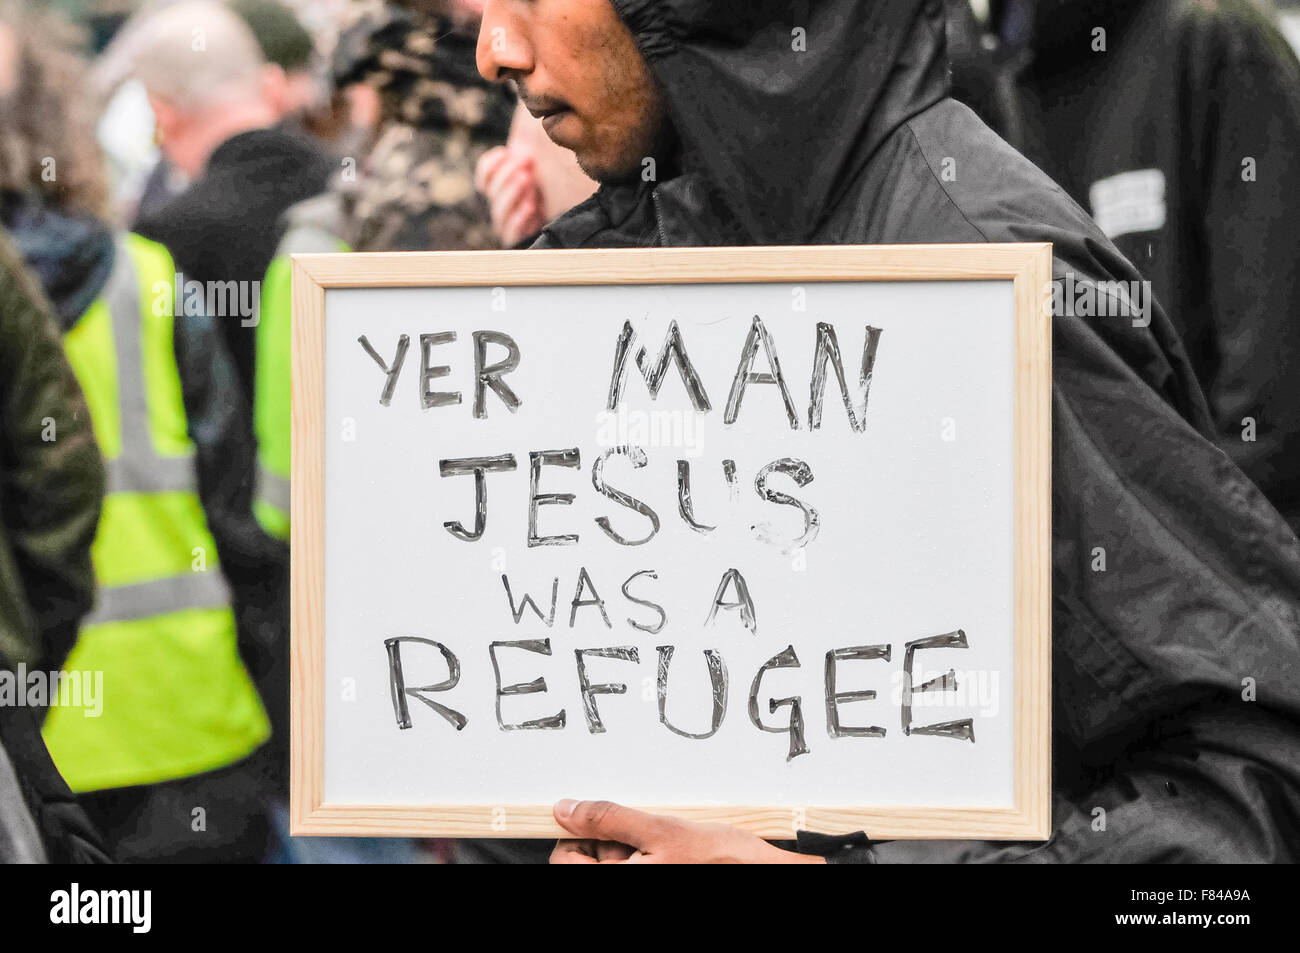 Belfast, Northern Ireland. 05 Dec 2015 - A man holds a sign saying 'Yer [Your] man Jesus was a refugee'. Credit:  Stephen Barnes/Alamy Live News. Stock Photo